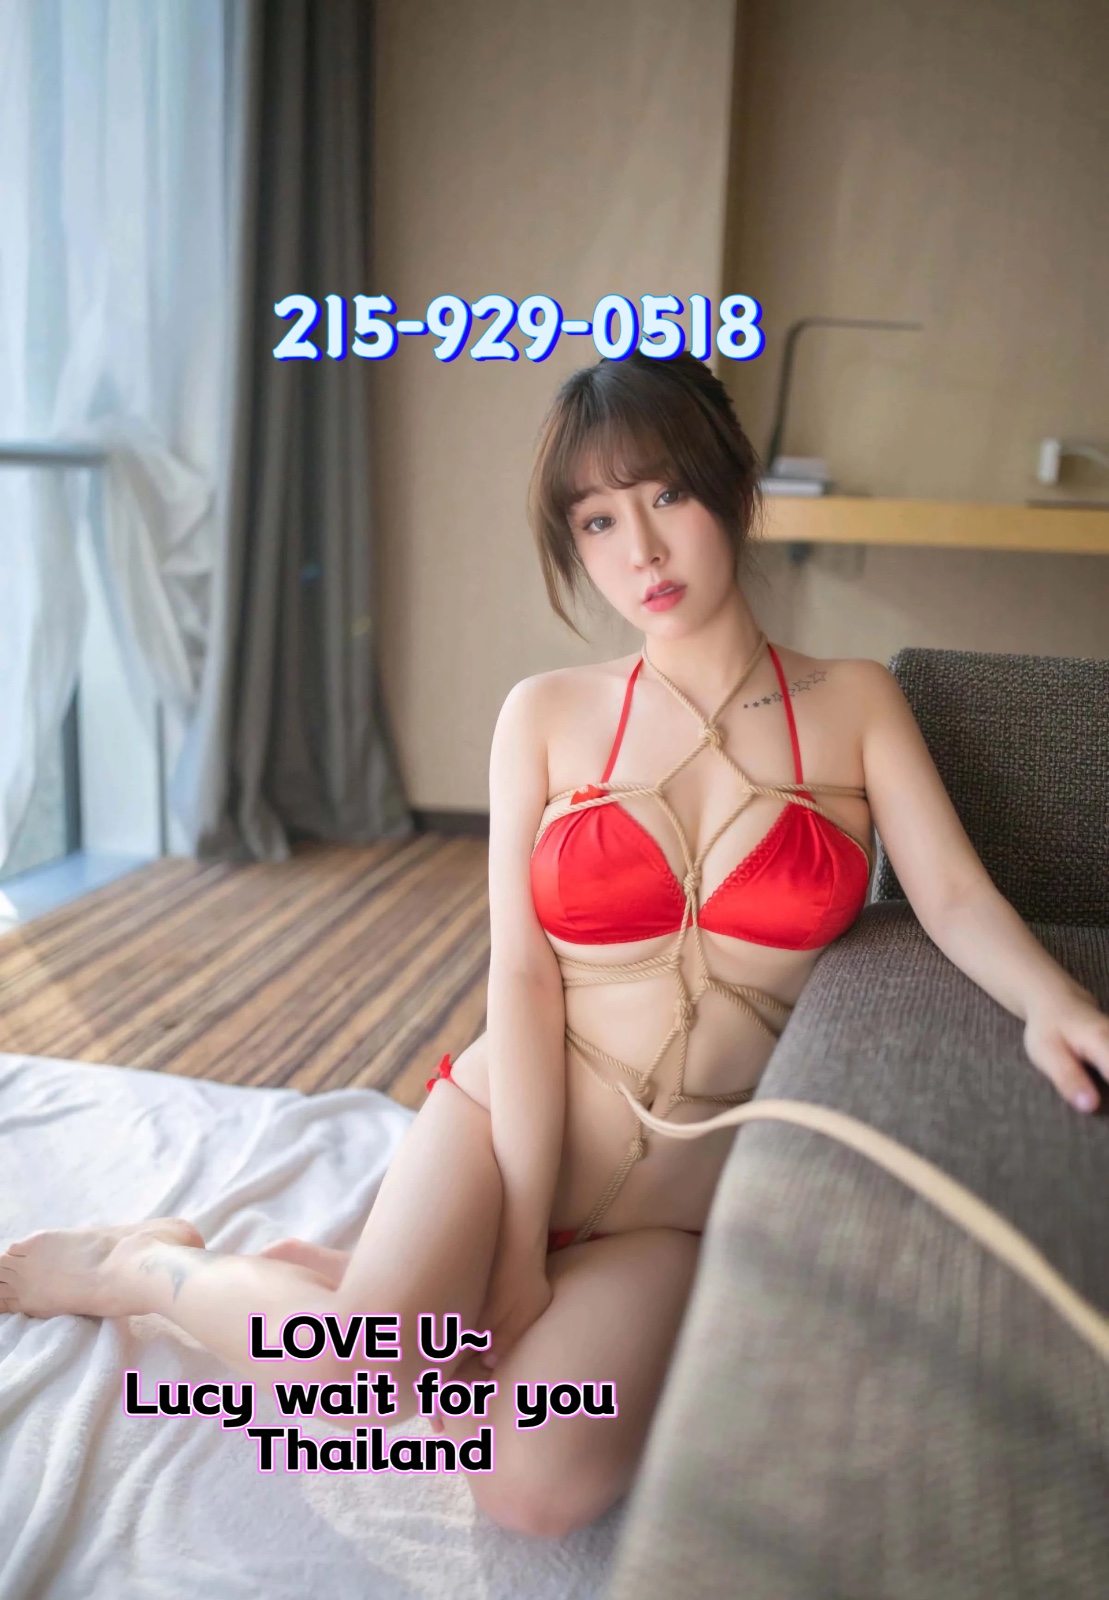 Reviews about escort with phone number 2159290518